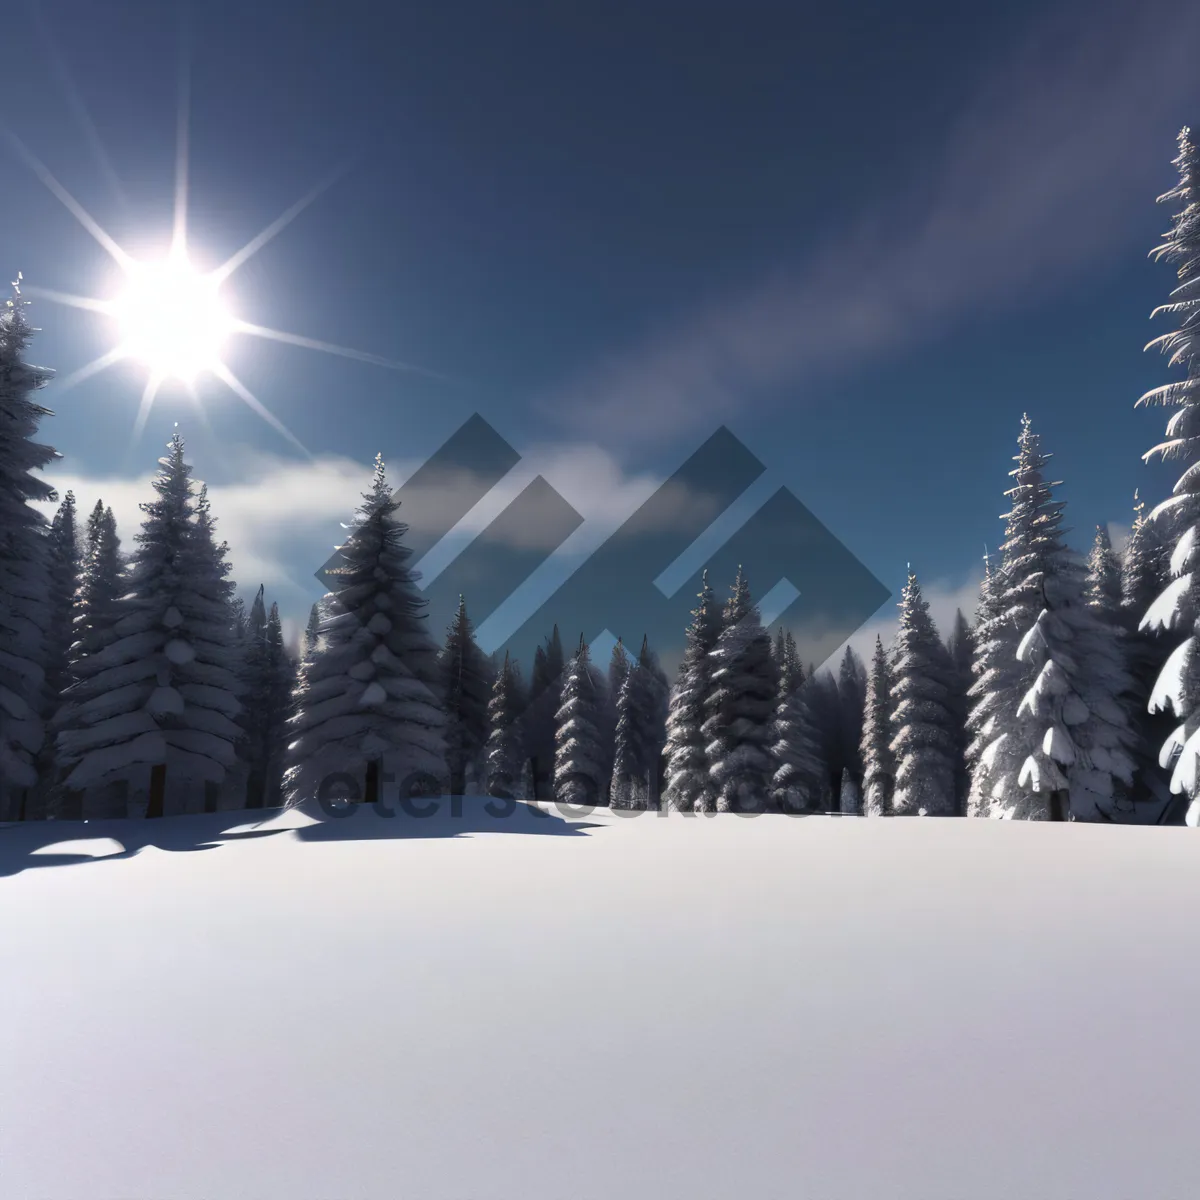 Picture of Wintry Mountain Landscape: Snow-Clad Evergreens and Frosty Slopes